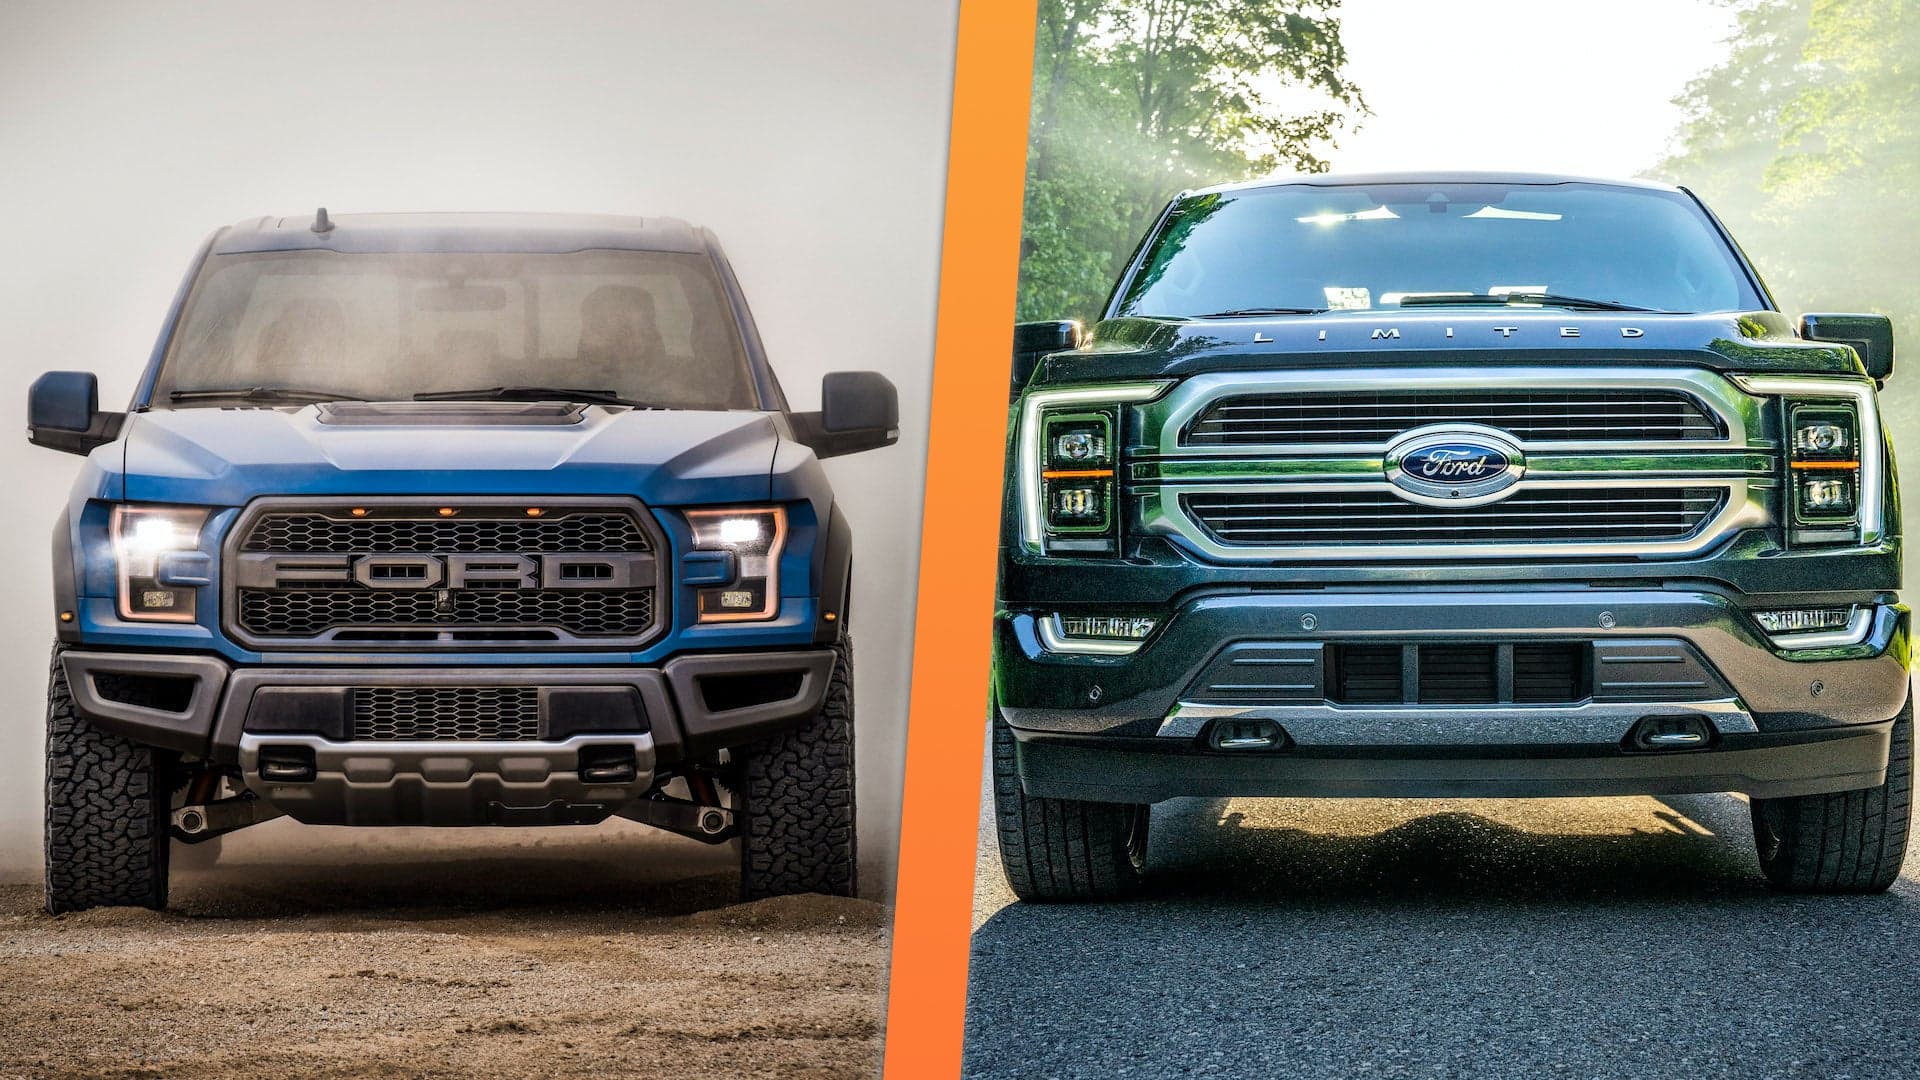 The Next Ford Raptor Will Be a 2021 Model After All